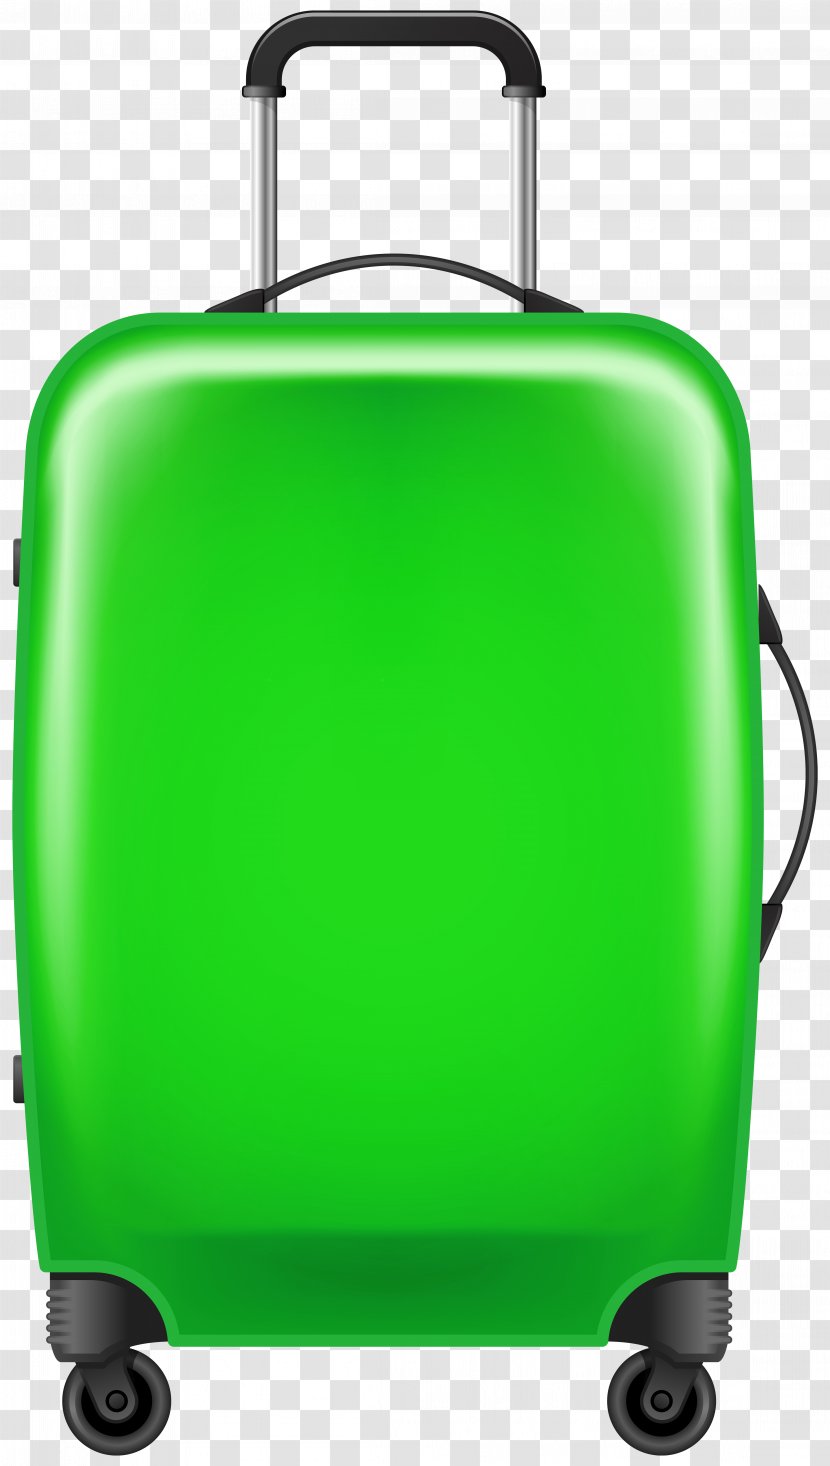 Hand Luggage Suitcase Baggage Trolley Clip Art - Travel - Green Transparent PNG